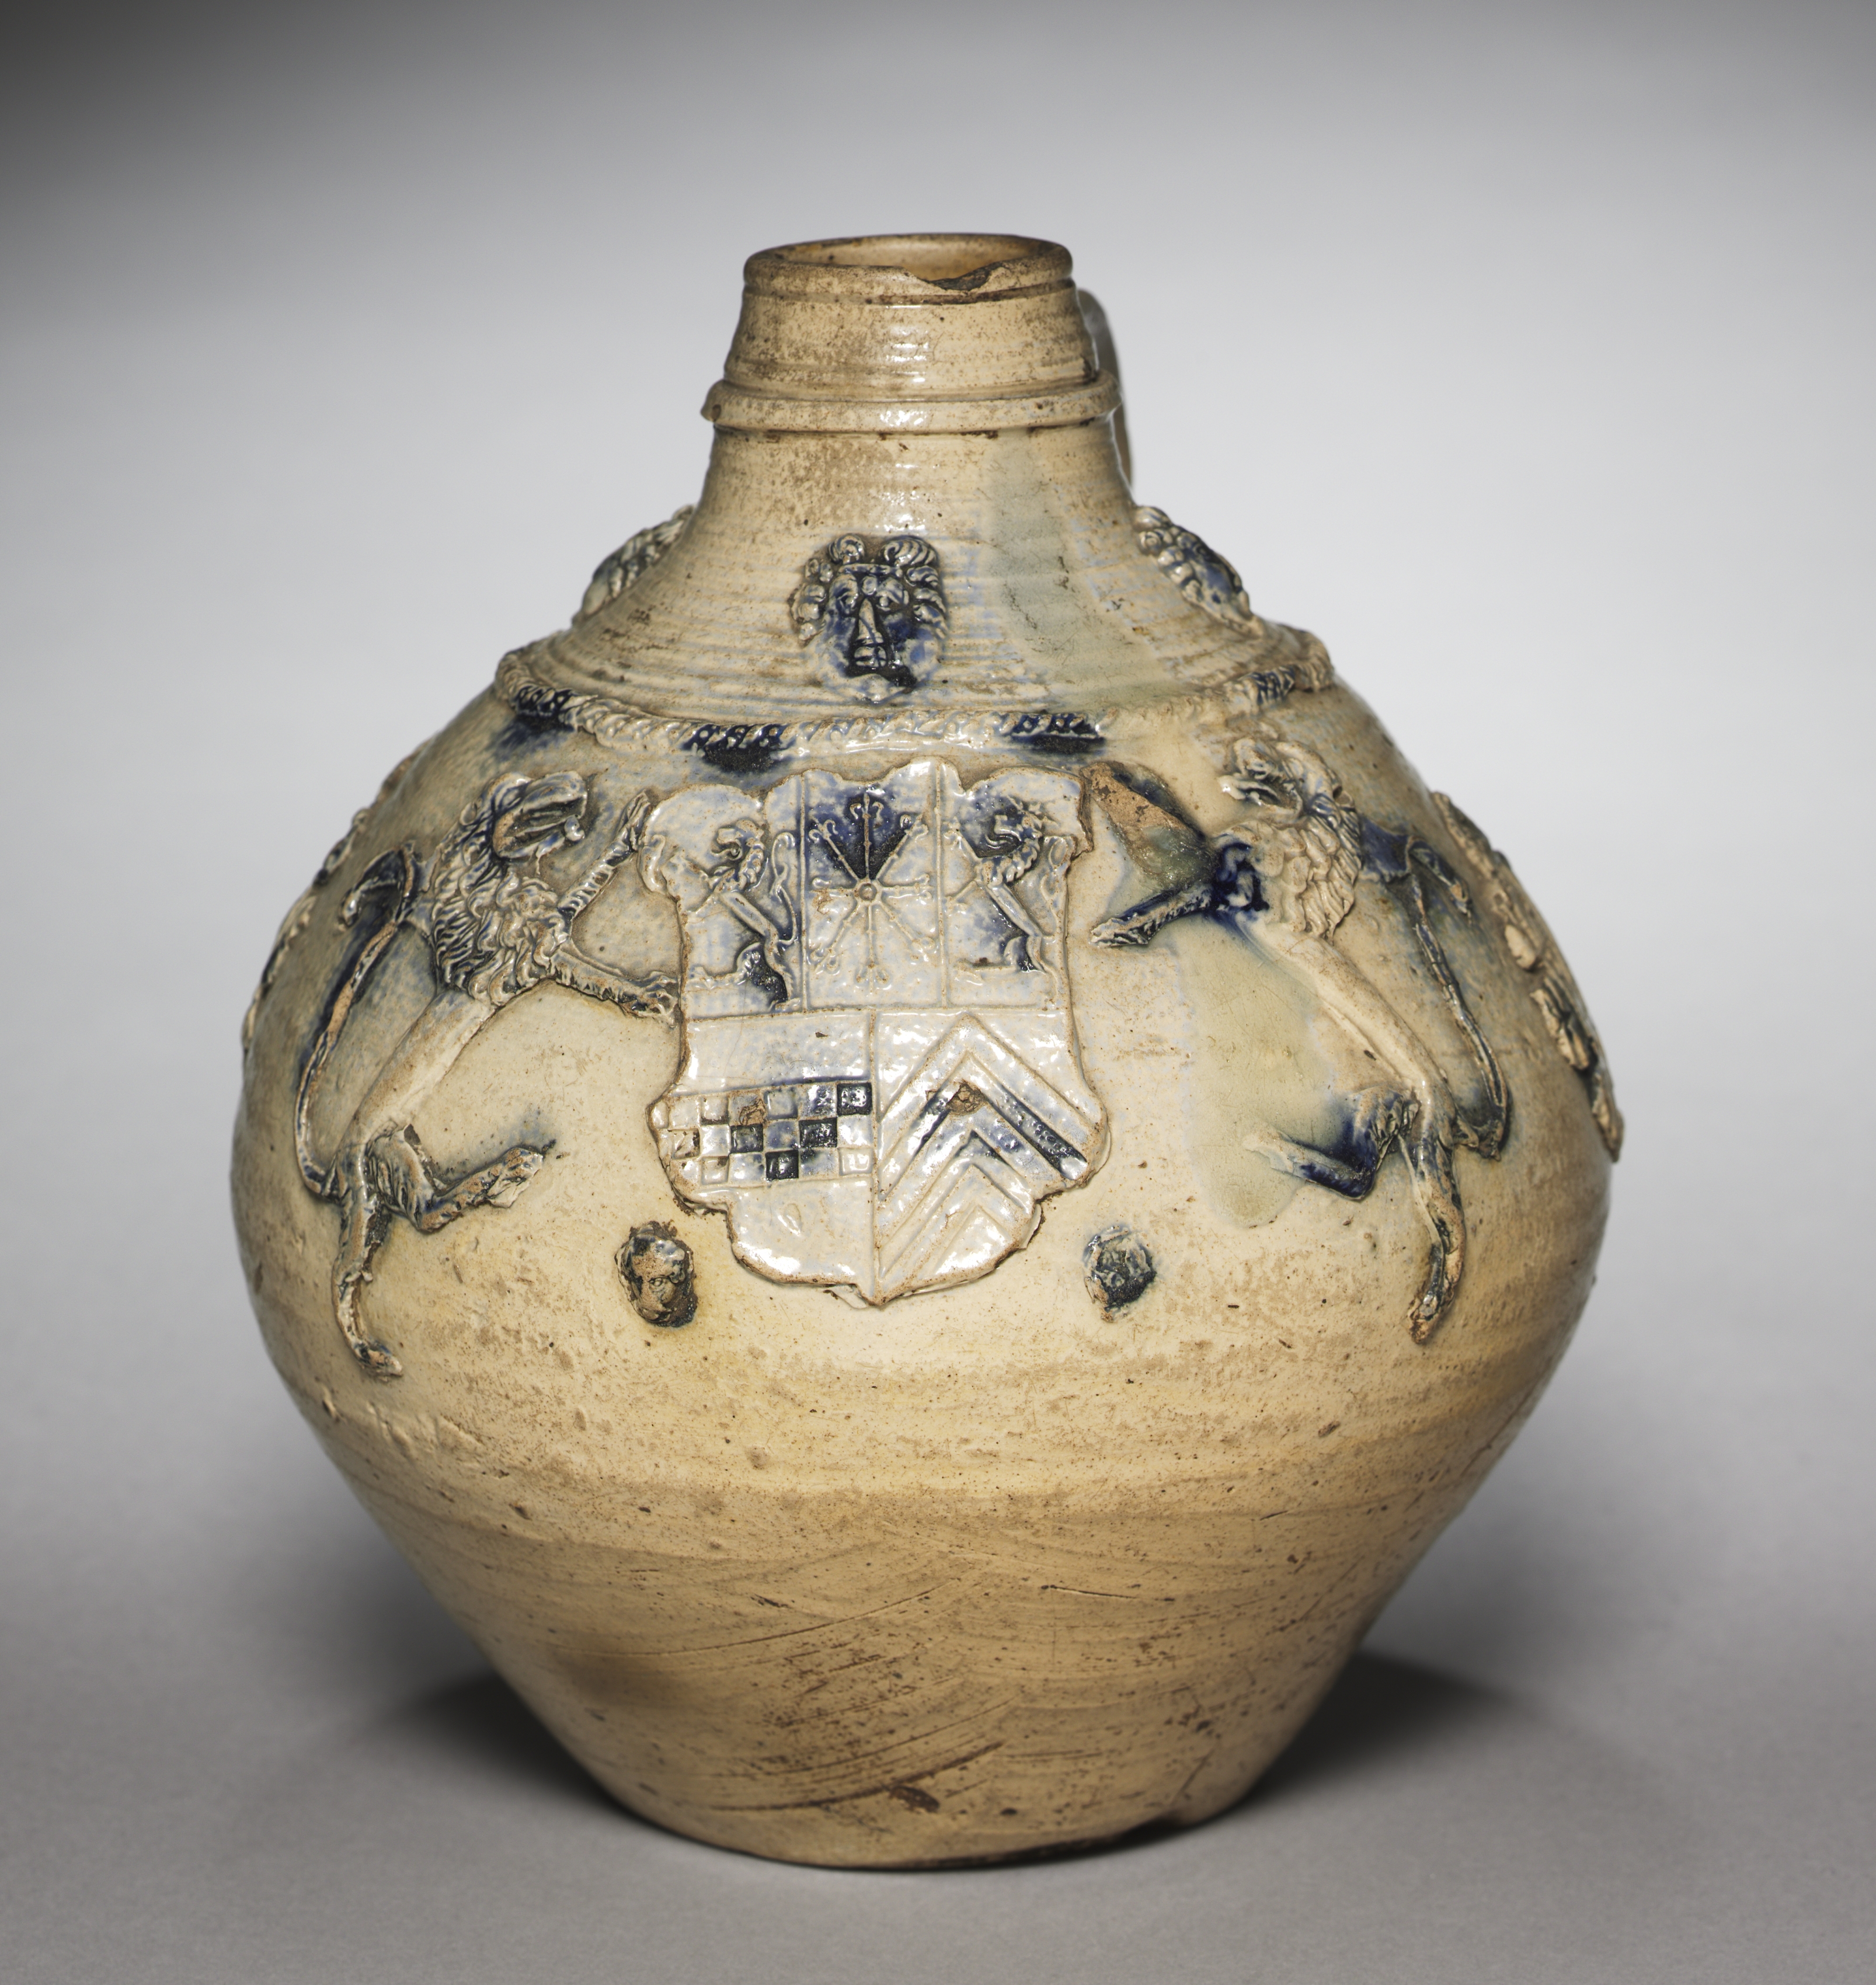 Jug with the Arms of Cleves-Berg